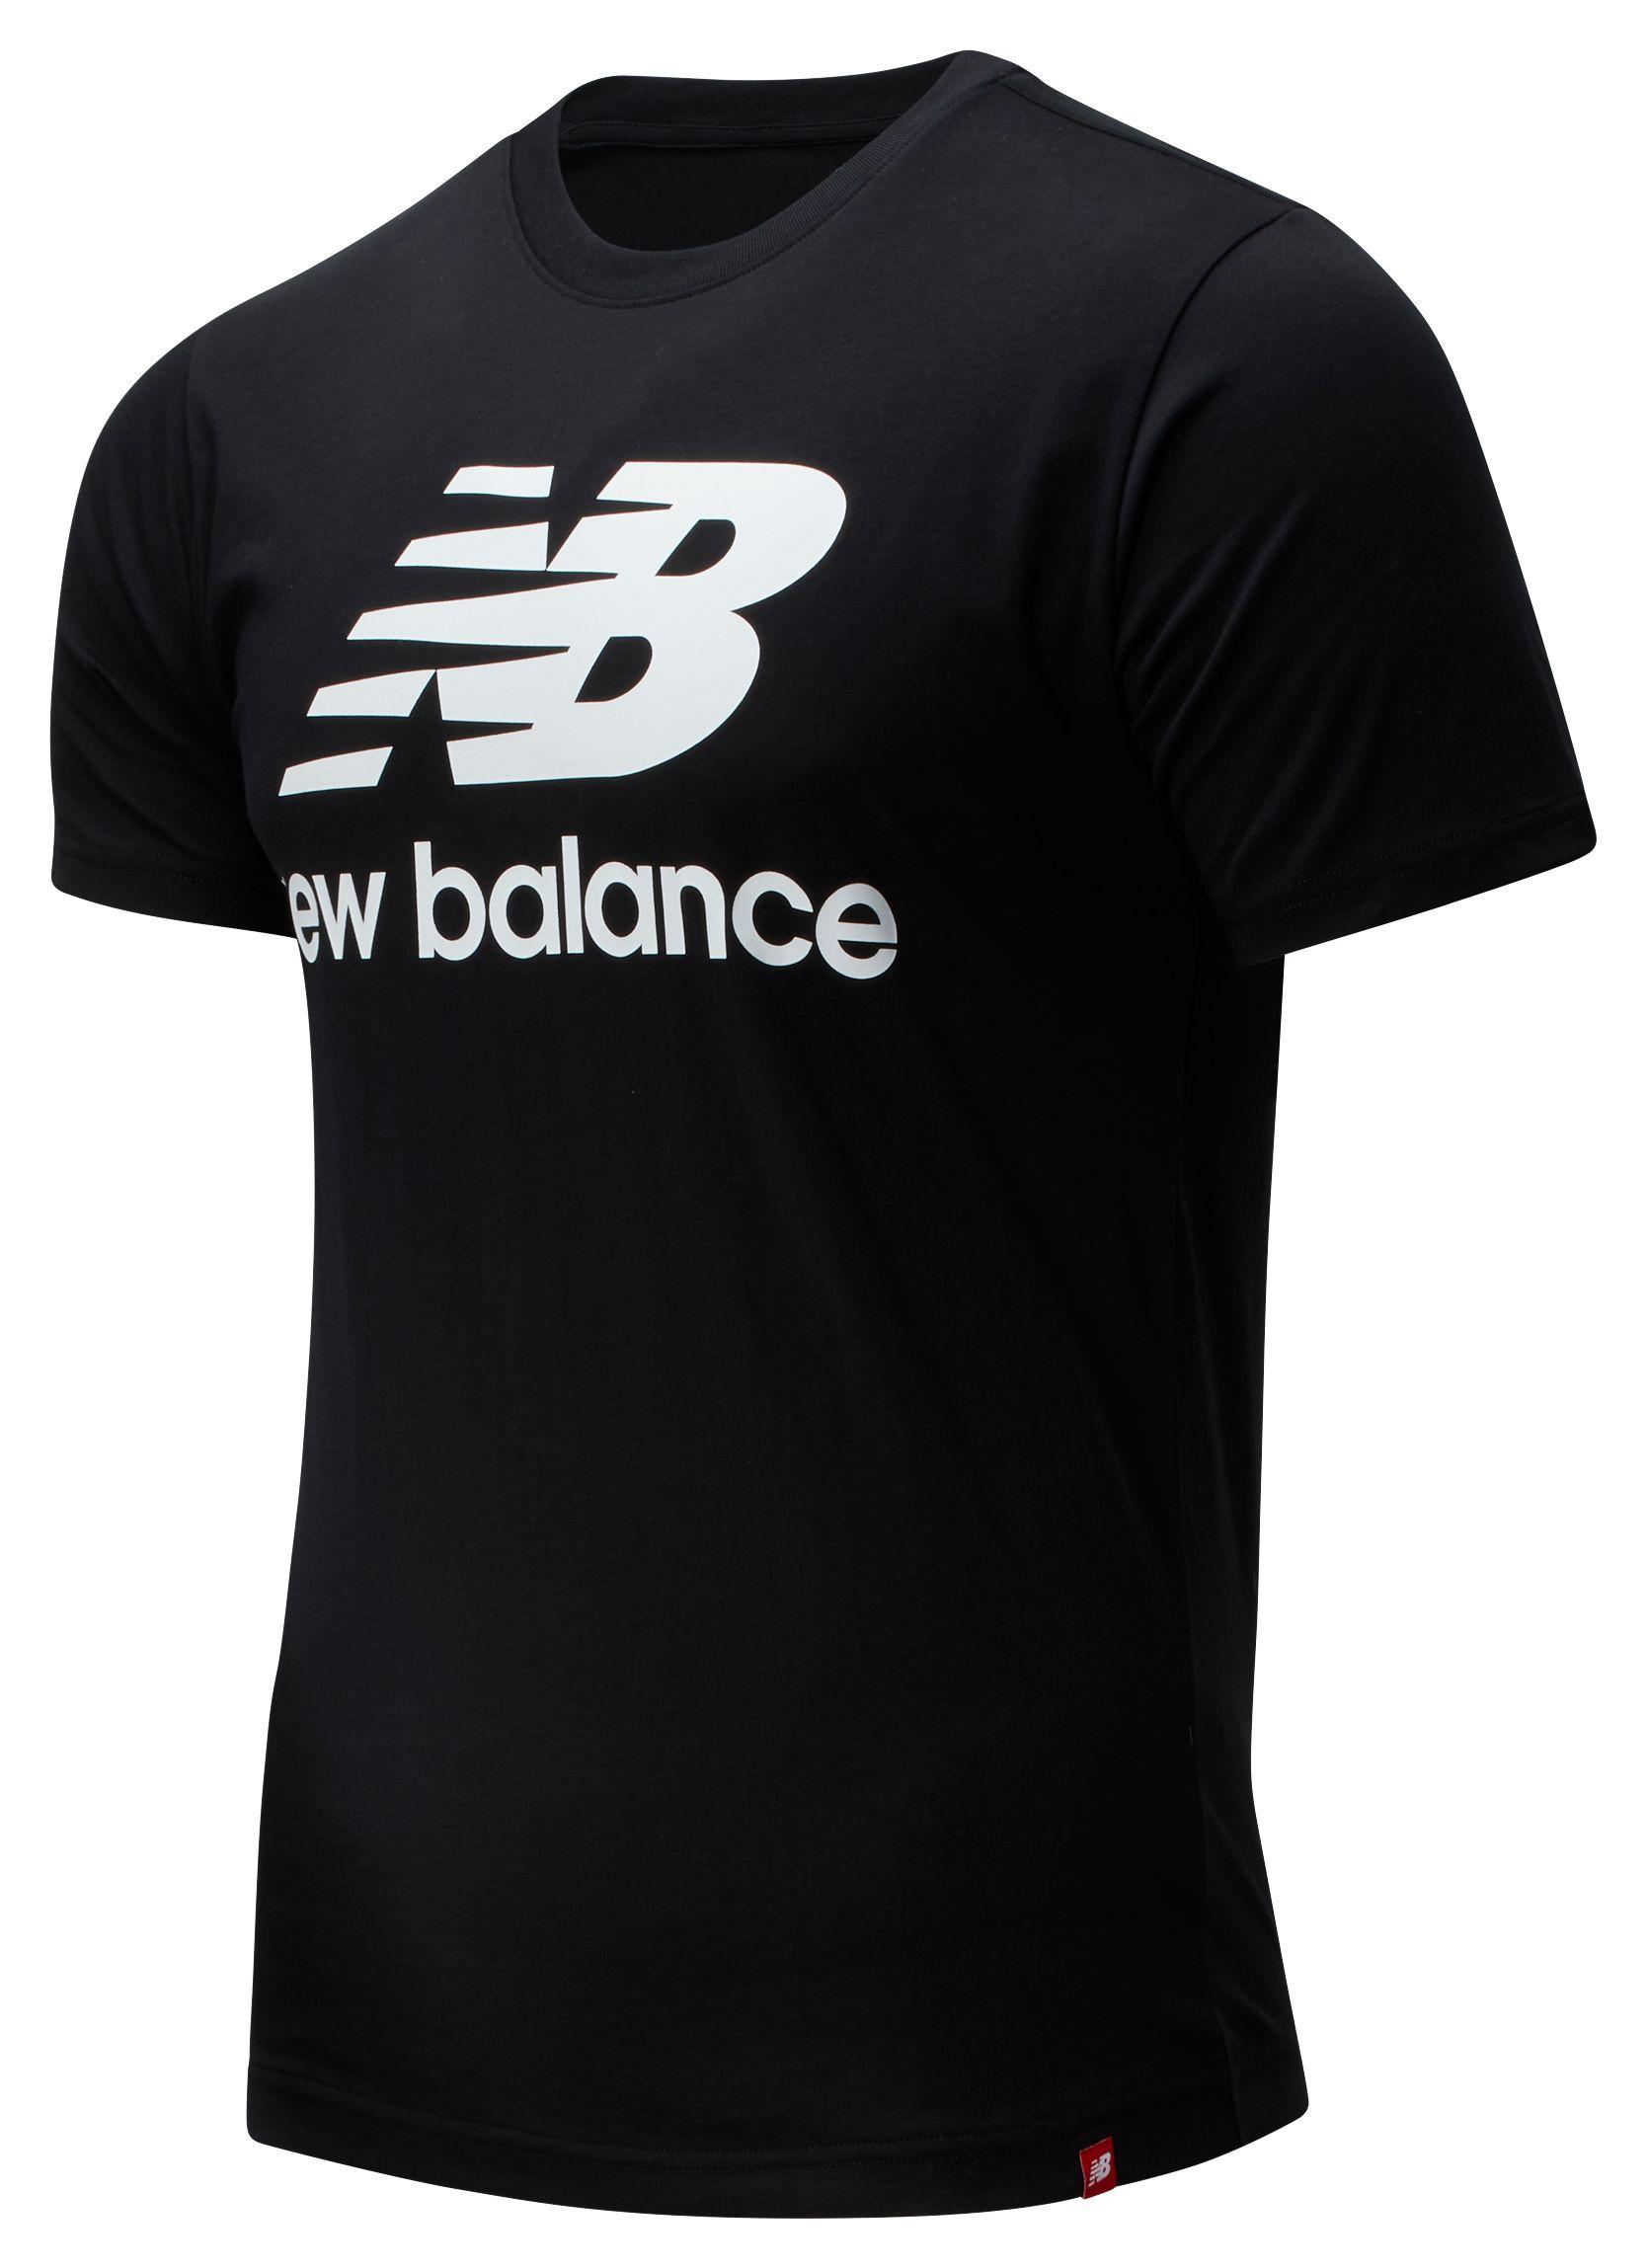 New Balance Essentials Stacked Logo T-shirt in Black for Men - Lyst